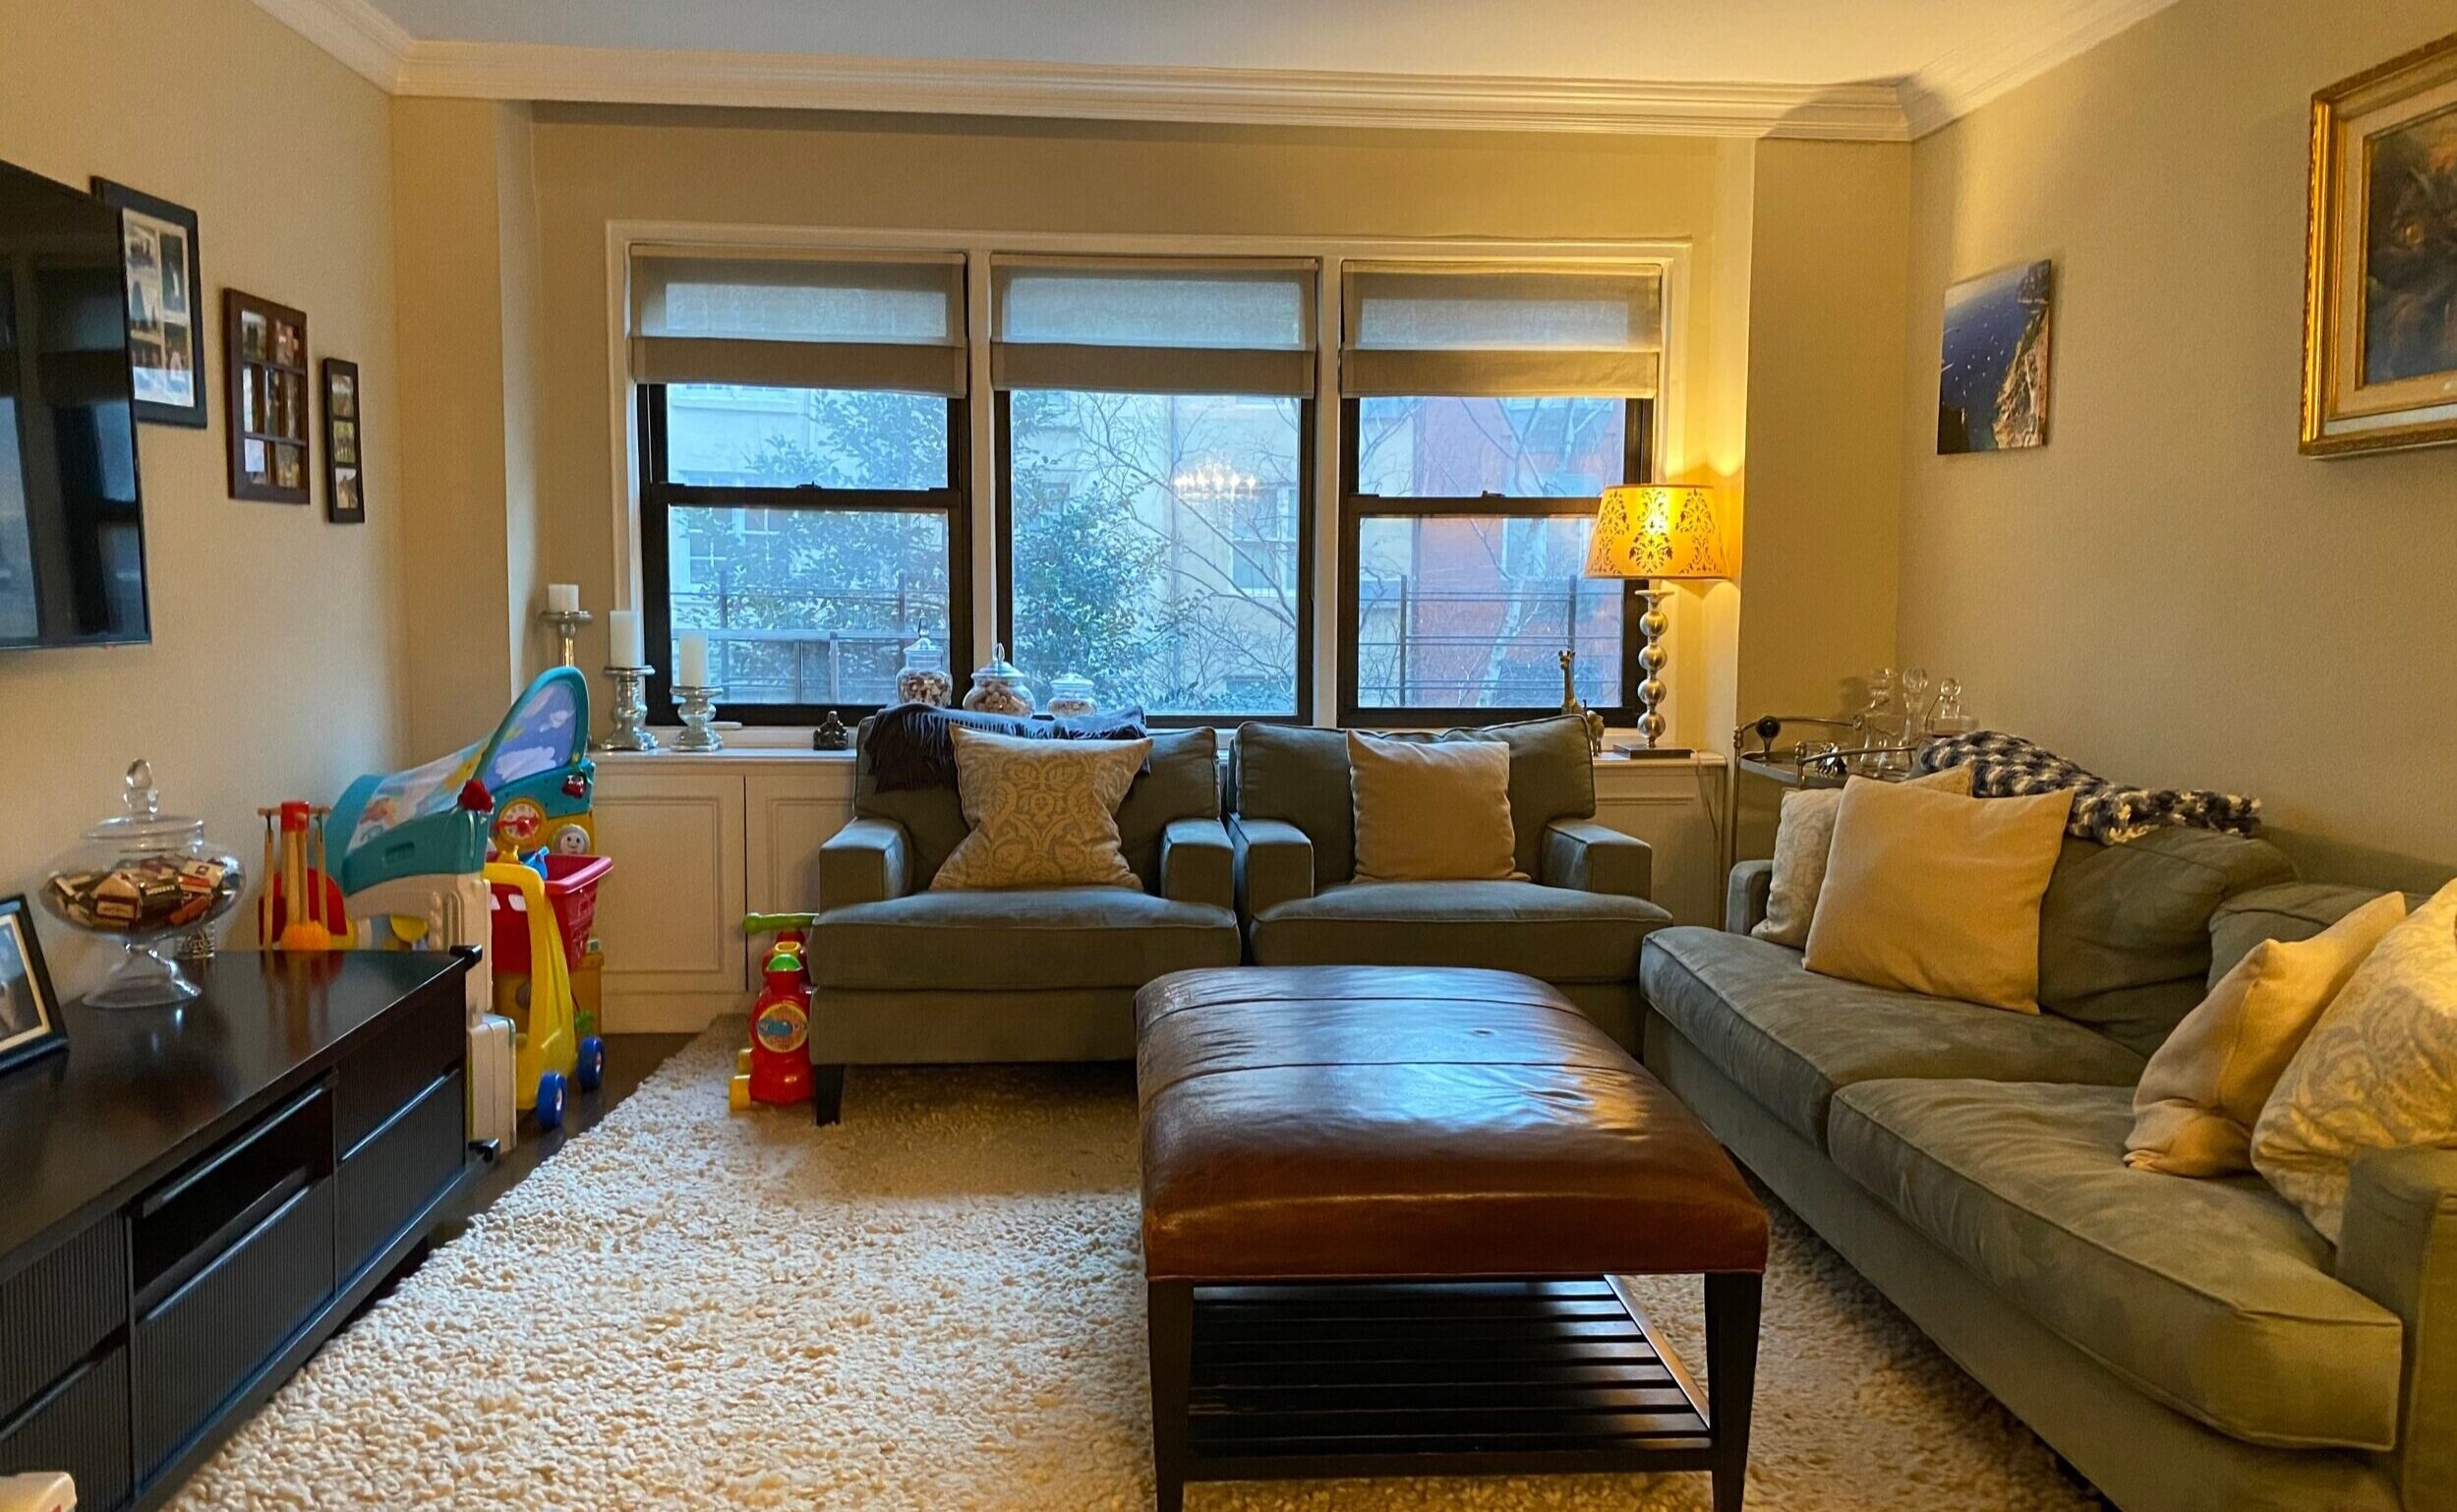 Living_Room_with_TV_205East77th3A%2B%25281%2529.jpg